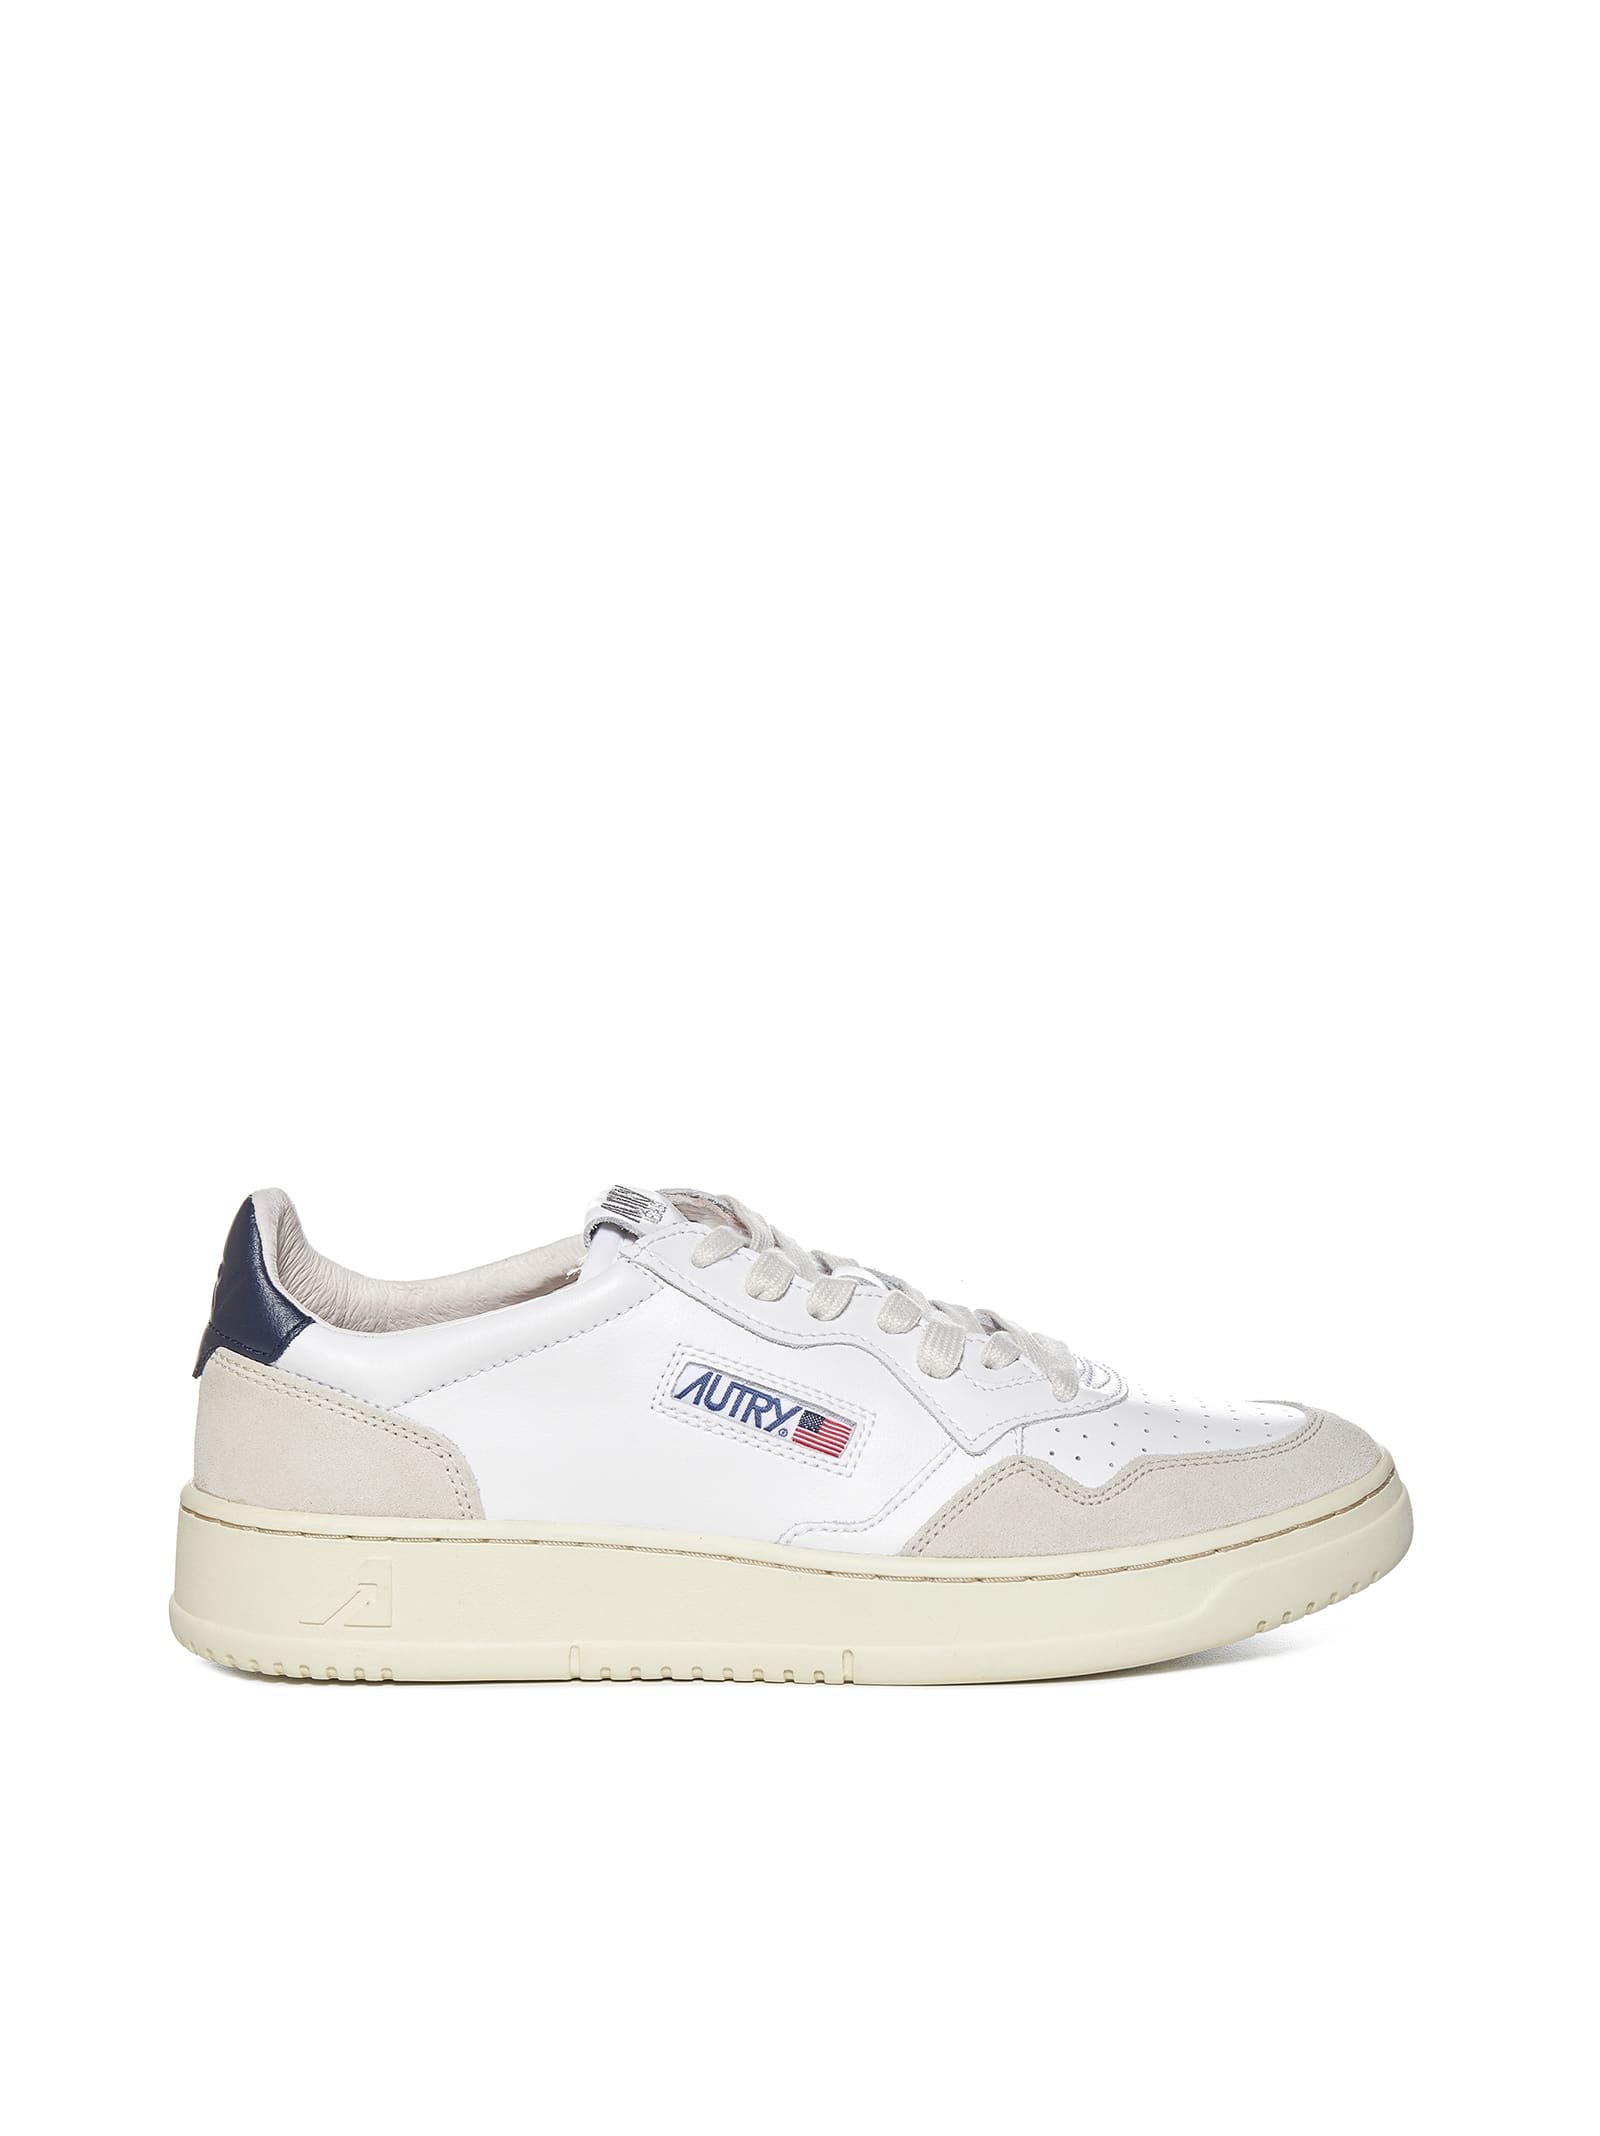 Autry Sneakers In Wht Blue | ModeSens